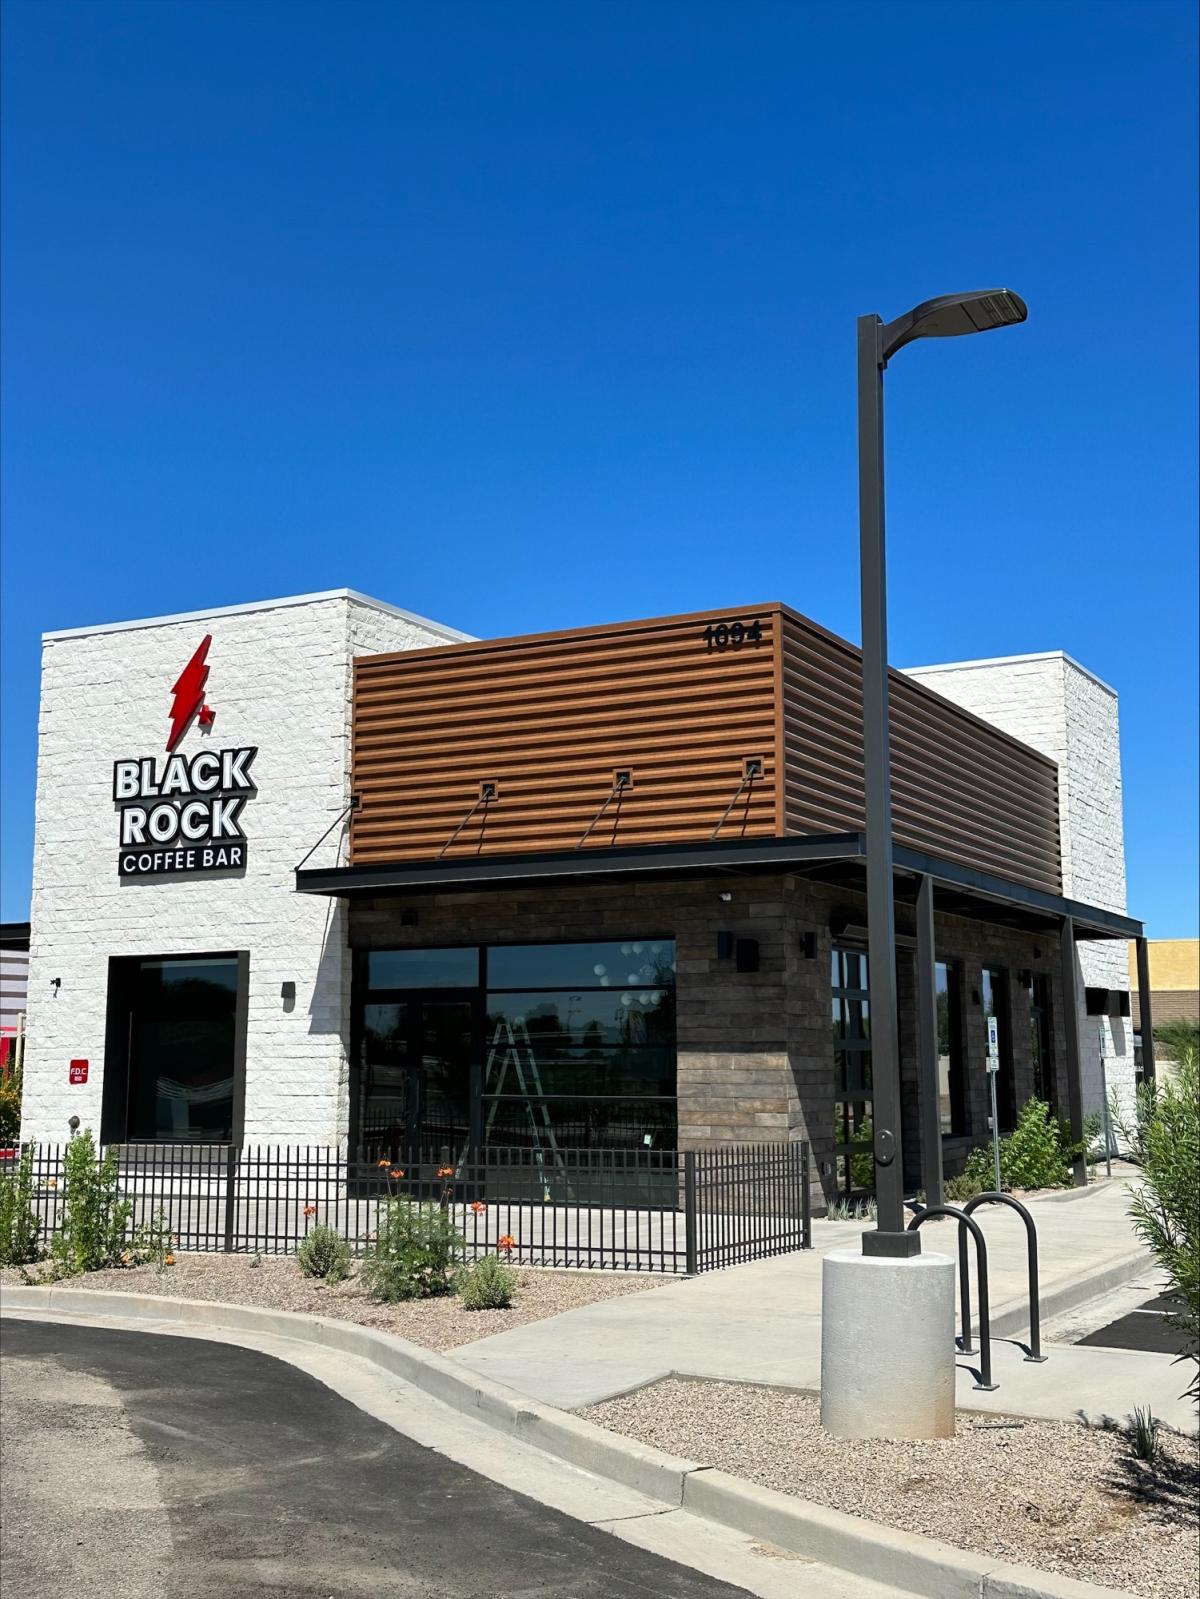 Black Rock Coffee Bar Expands Presence in Arizona with Grand